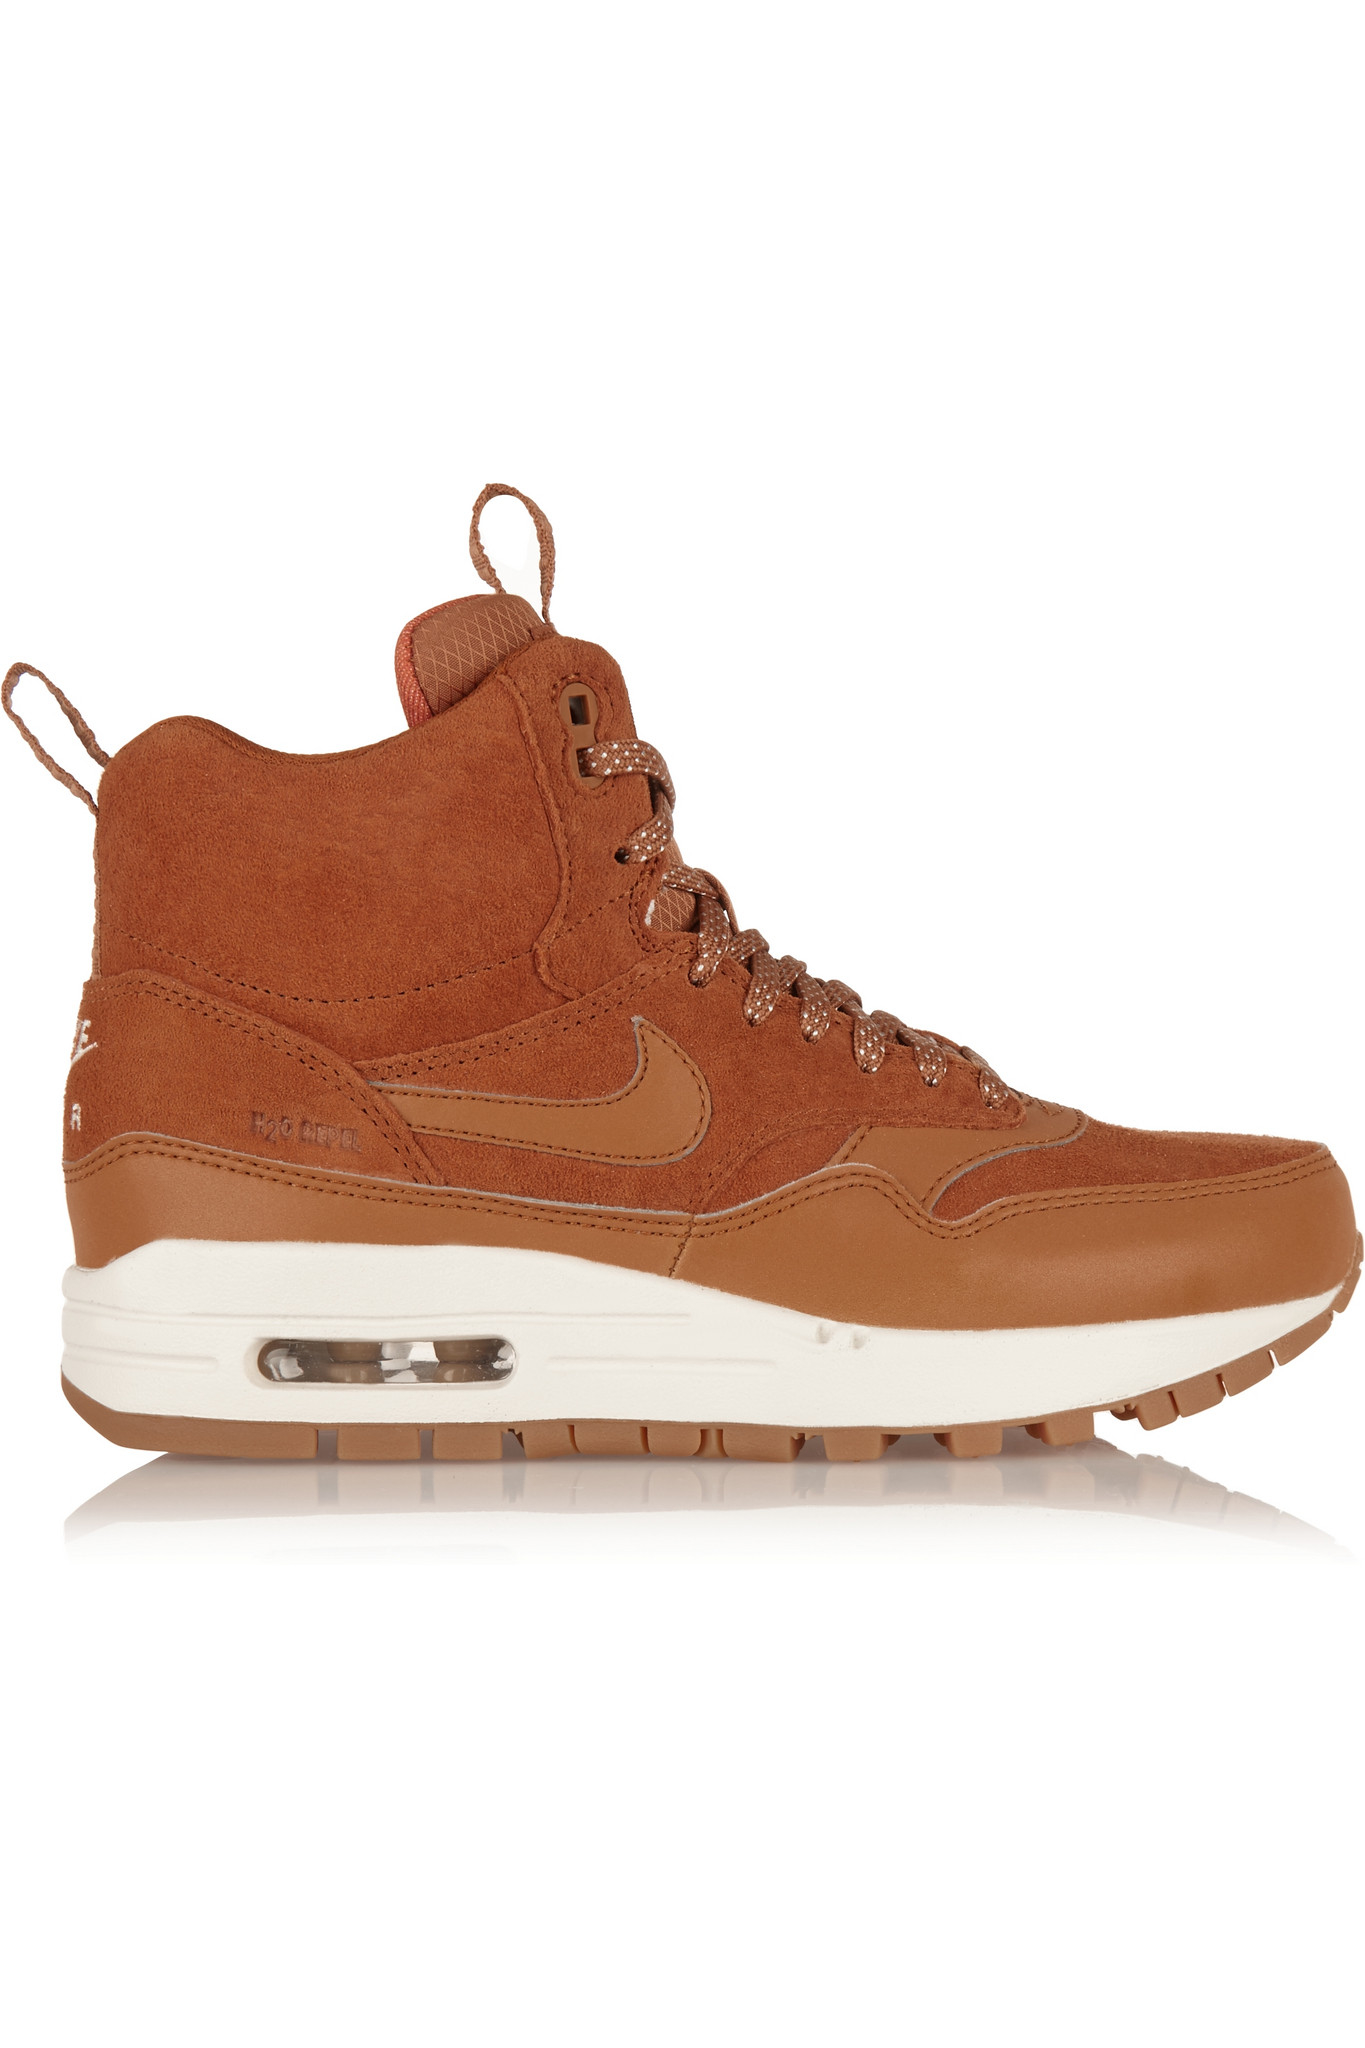 Elaborate Breathing Couscous Nike - Air Max 1 Suede And Leather High-top Sneakers - Tan in Brown | Lyst